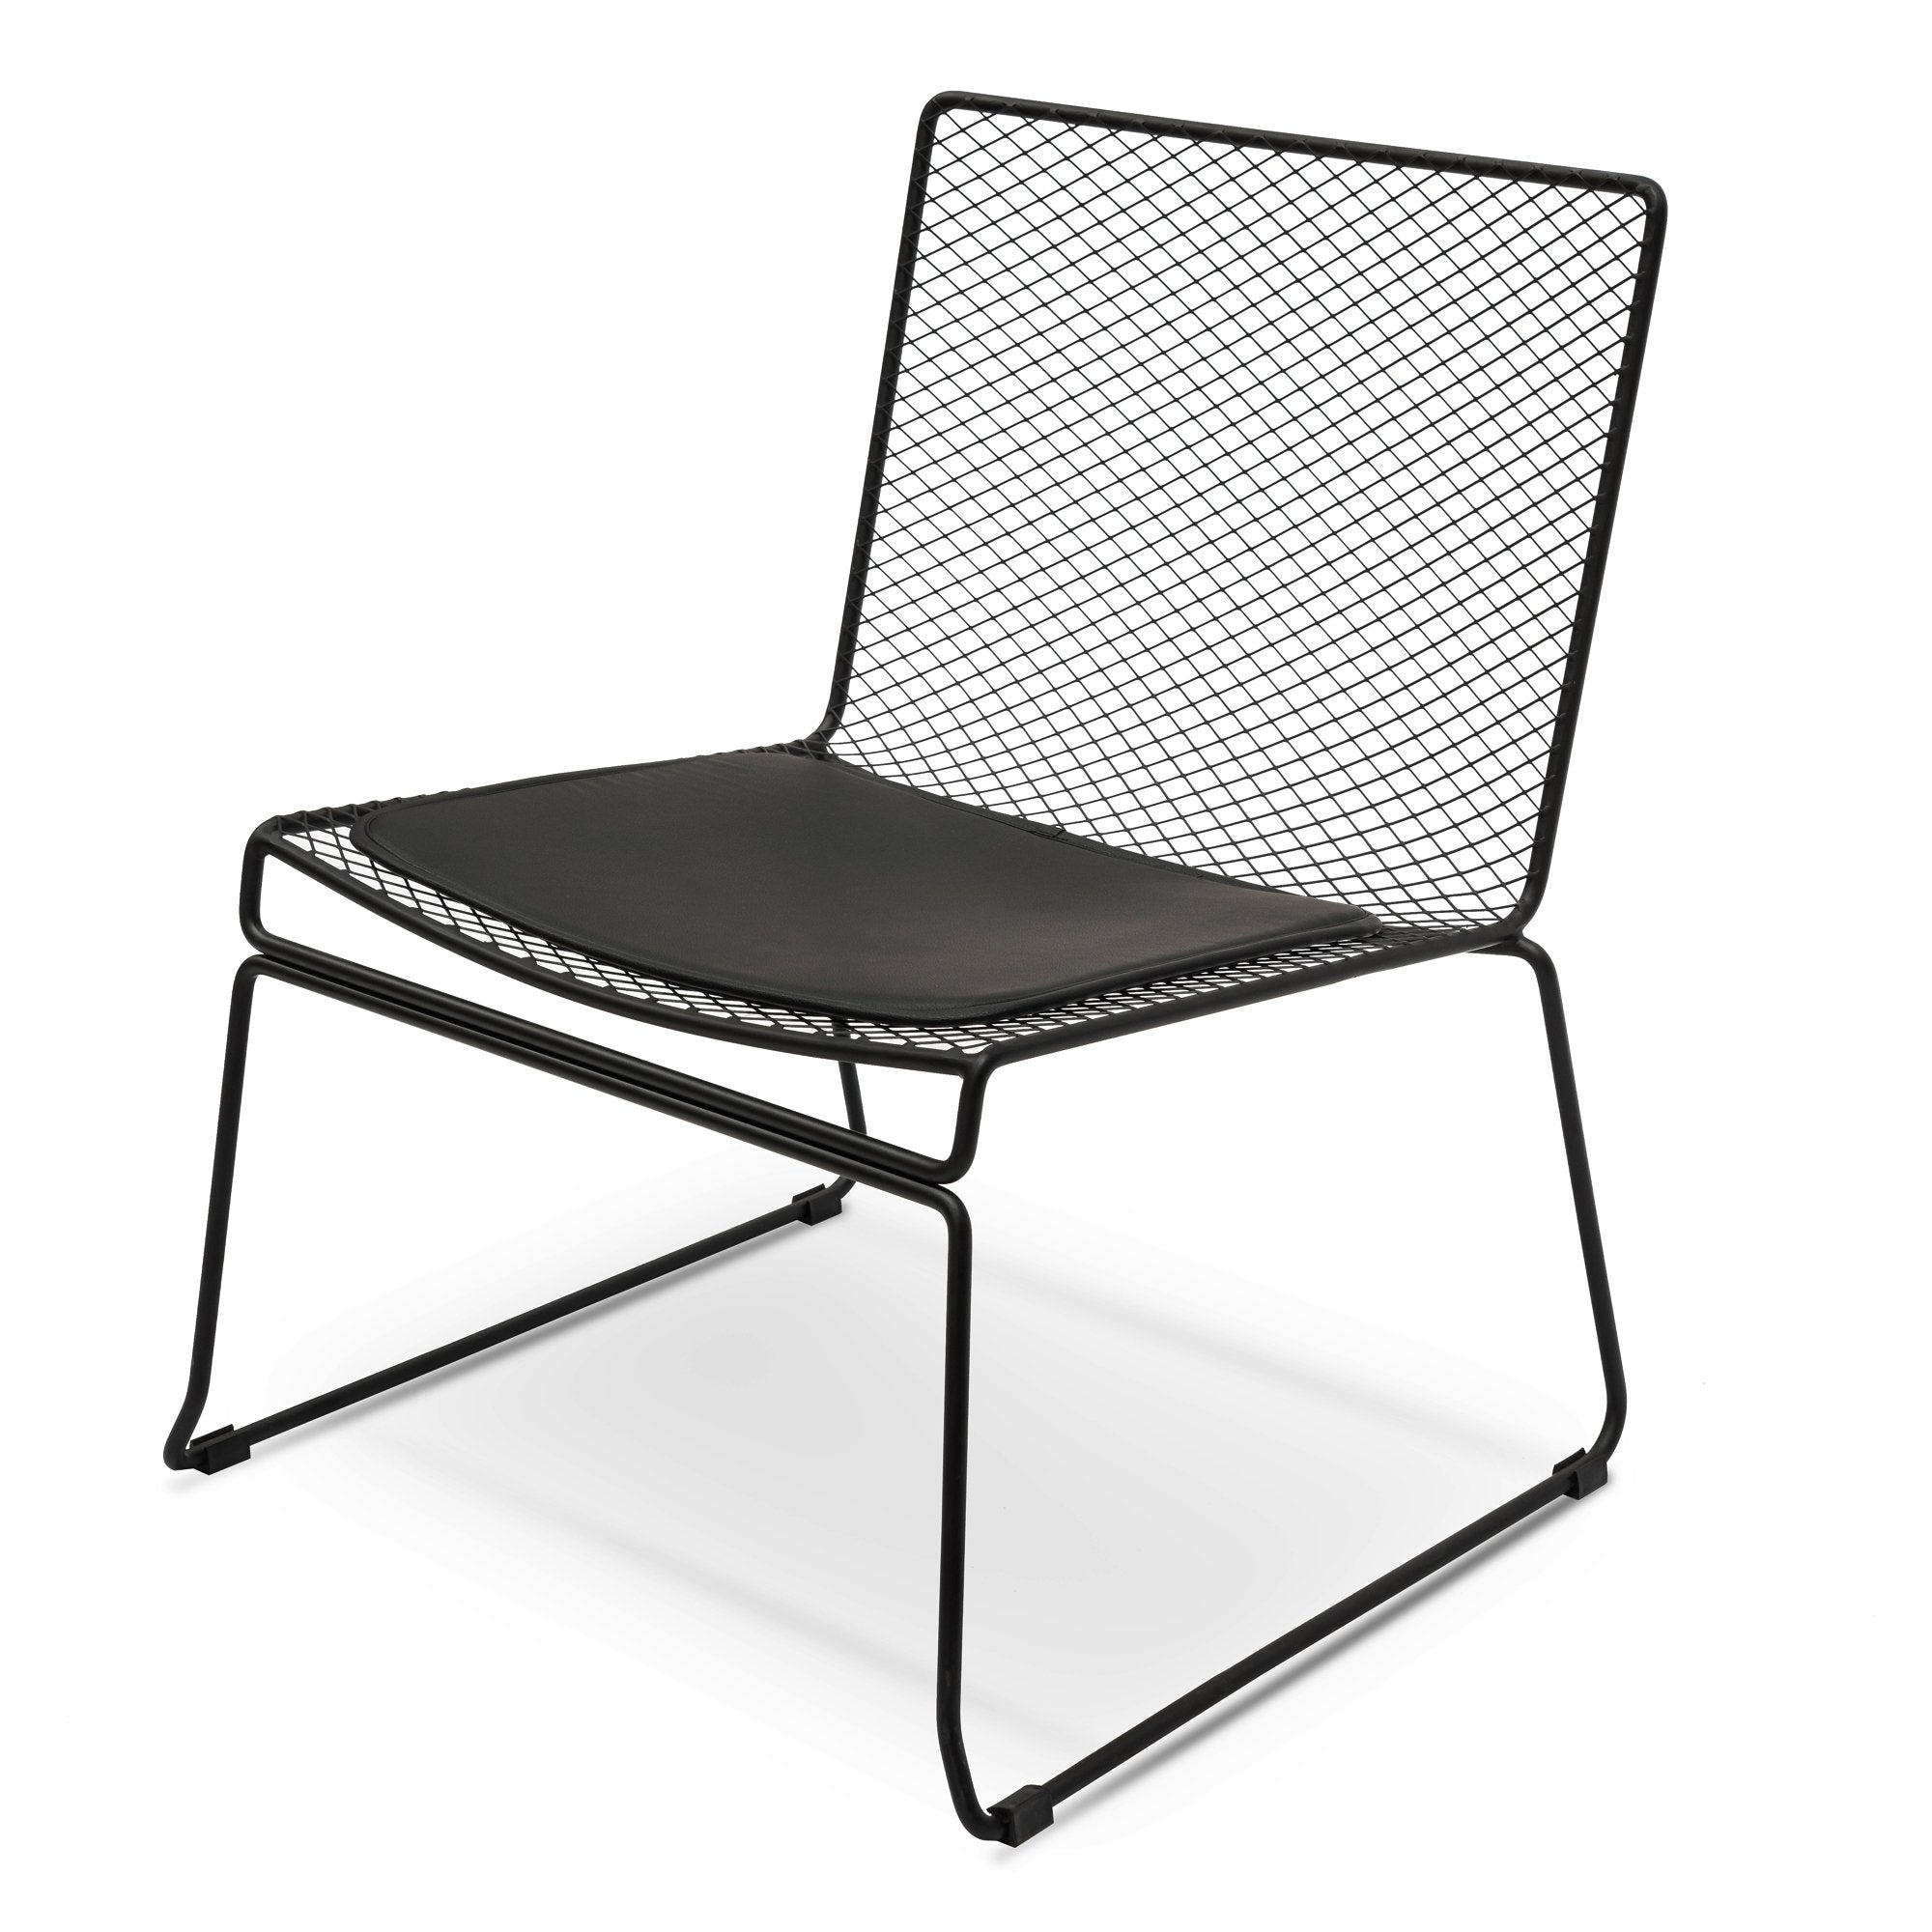 Paisley Lounge Chair With Light Grey Fabric Seat - Black Frame